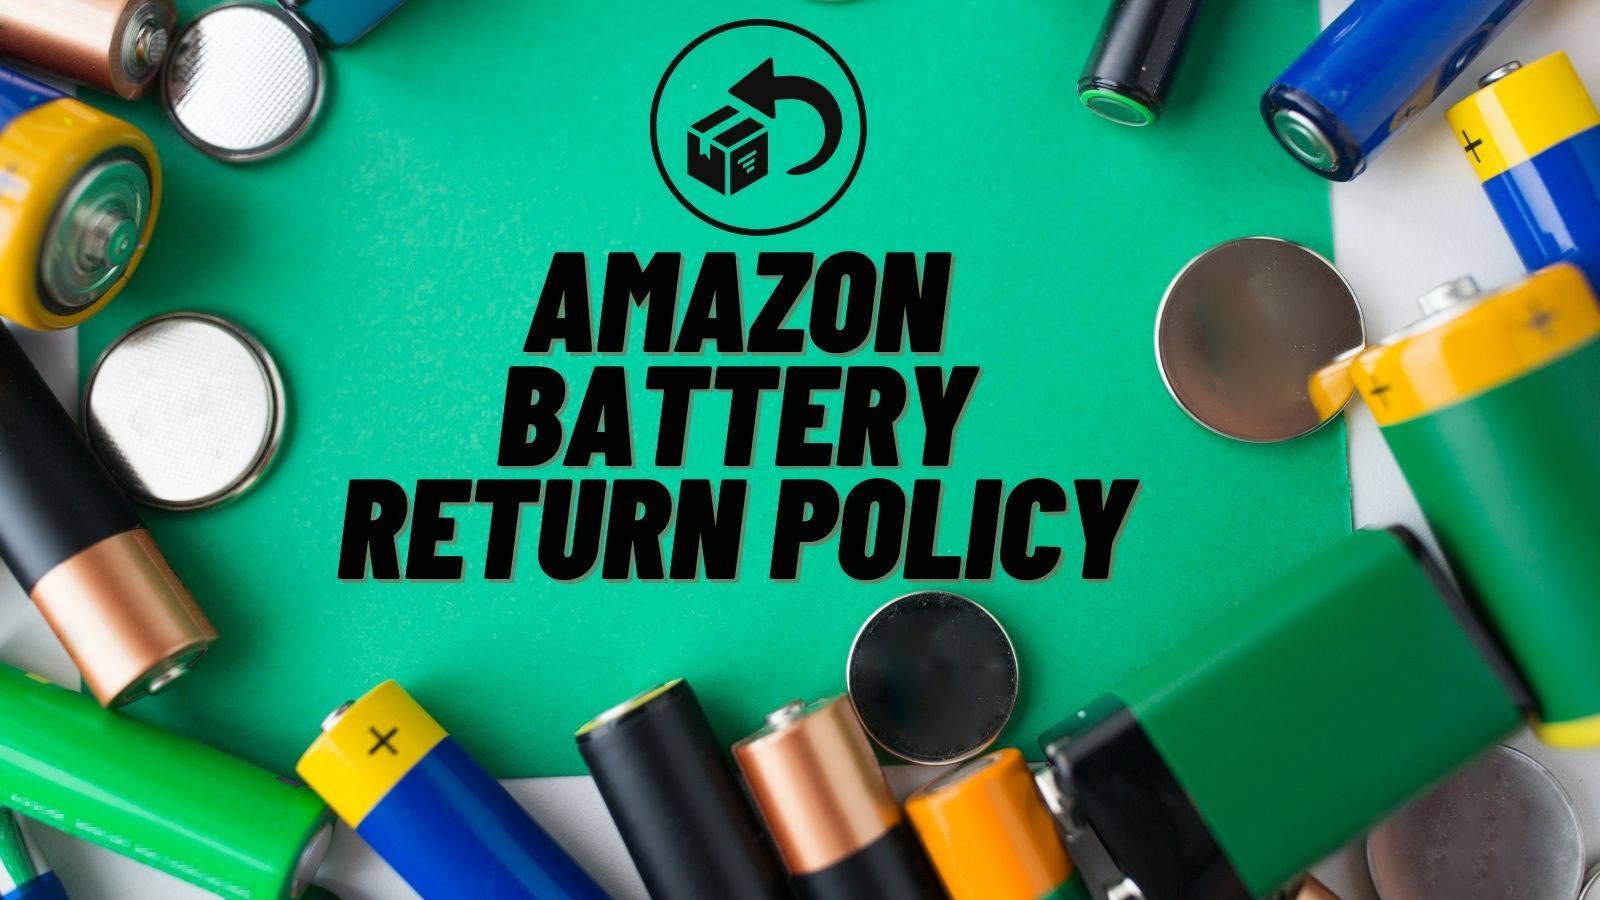 Amazon Battery Return Policy (All You Need to Know)